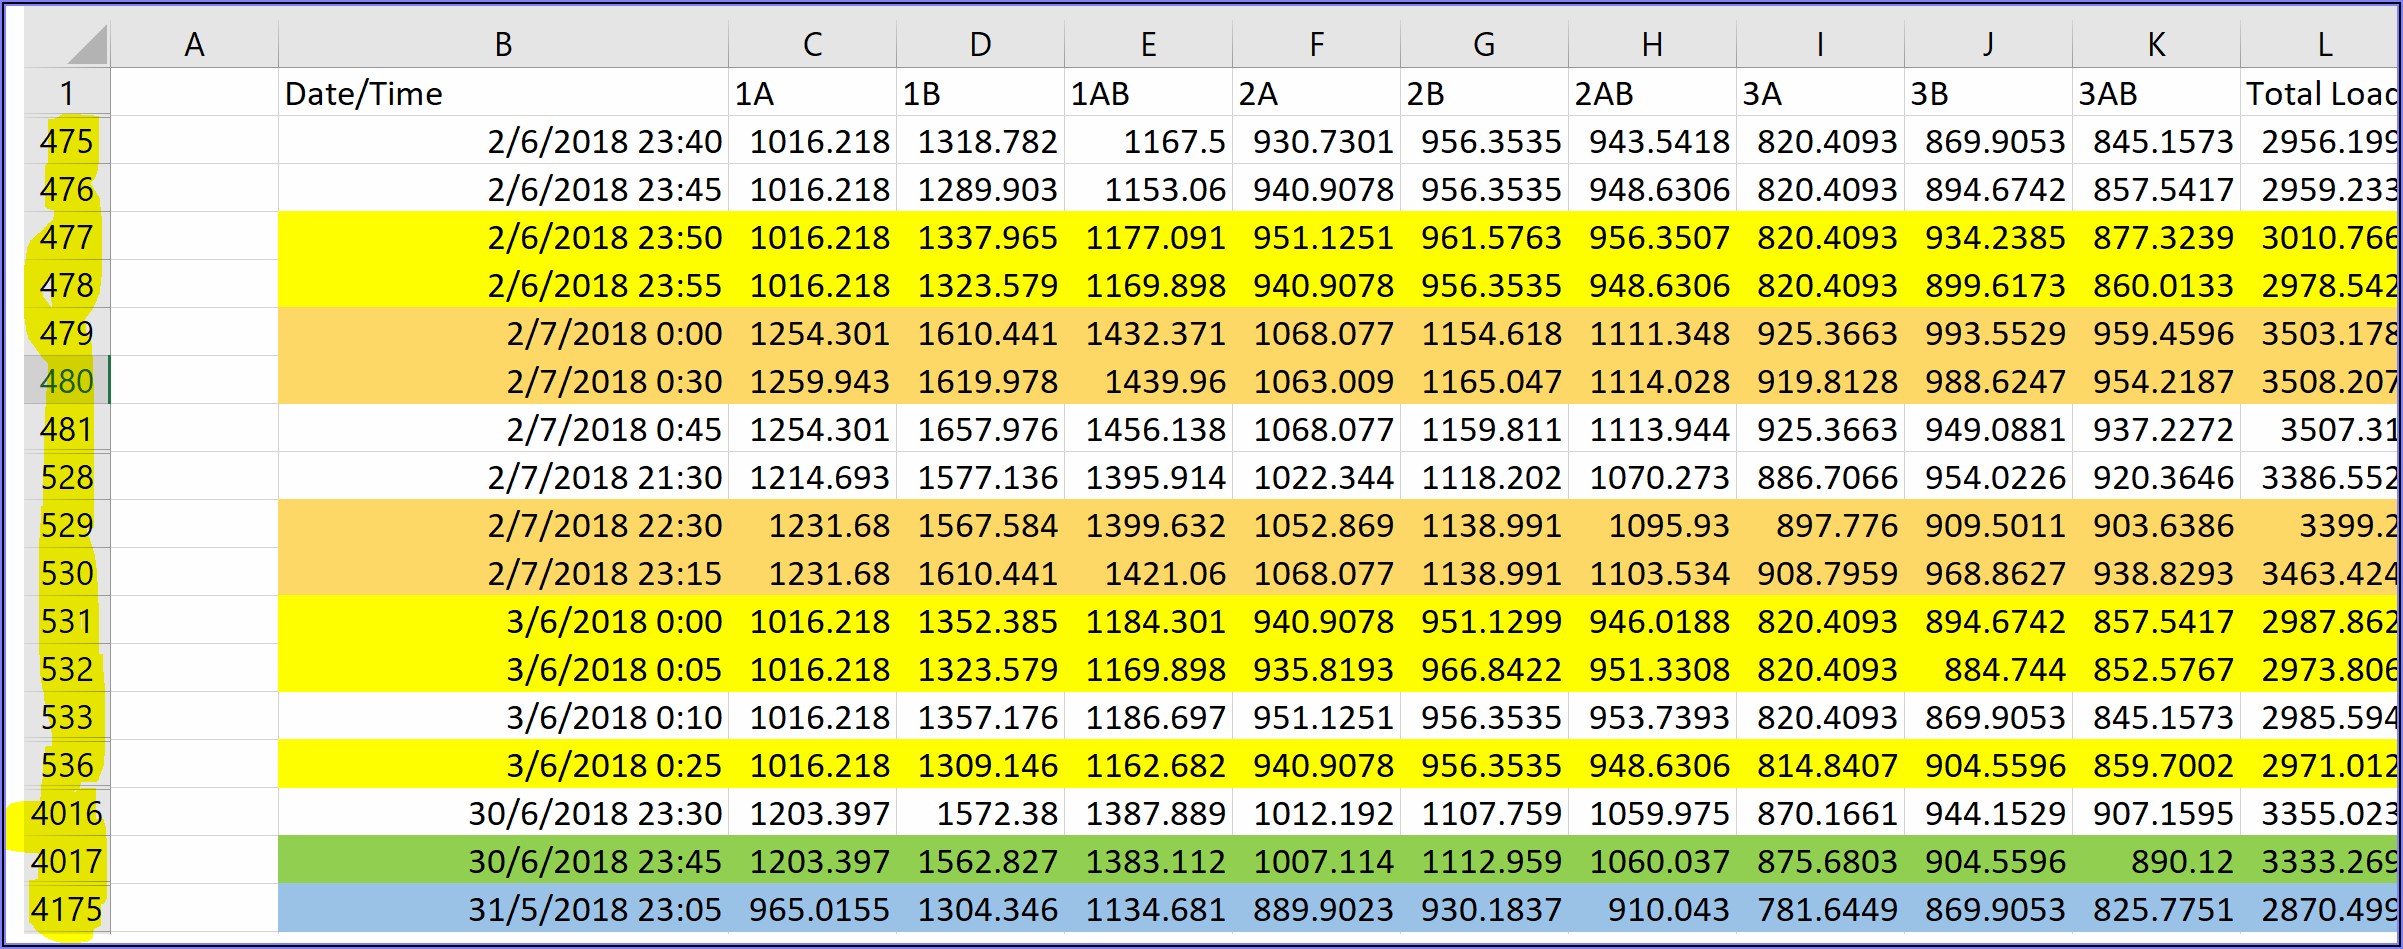 Excel Vba Auto Sort By Date